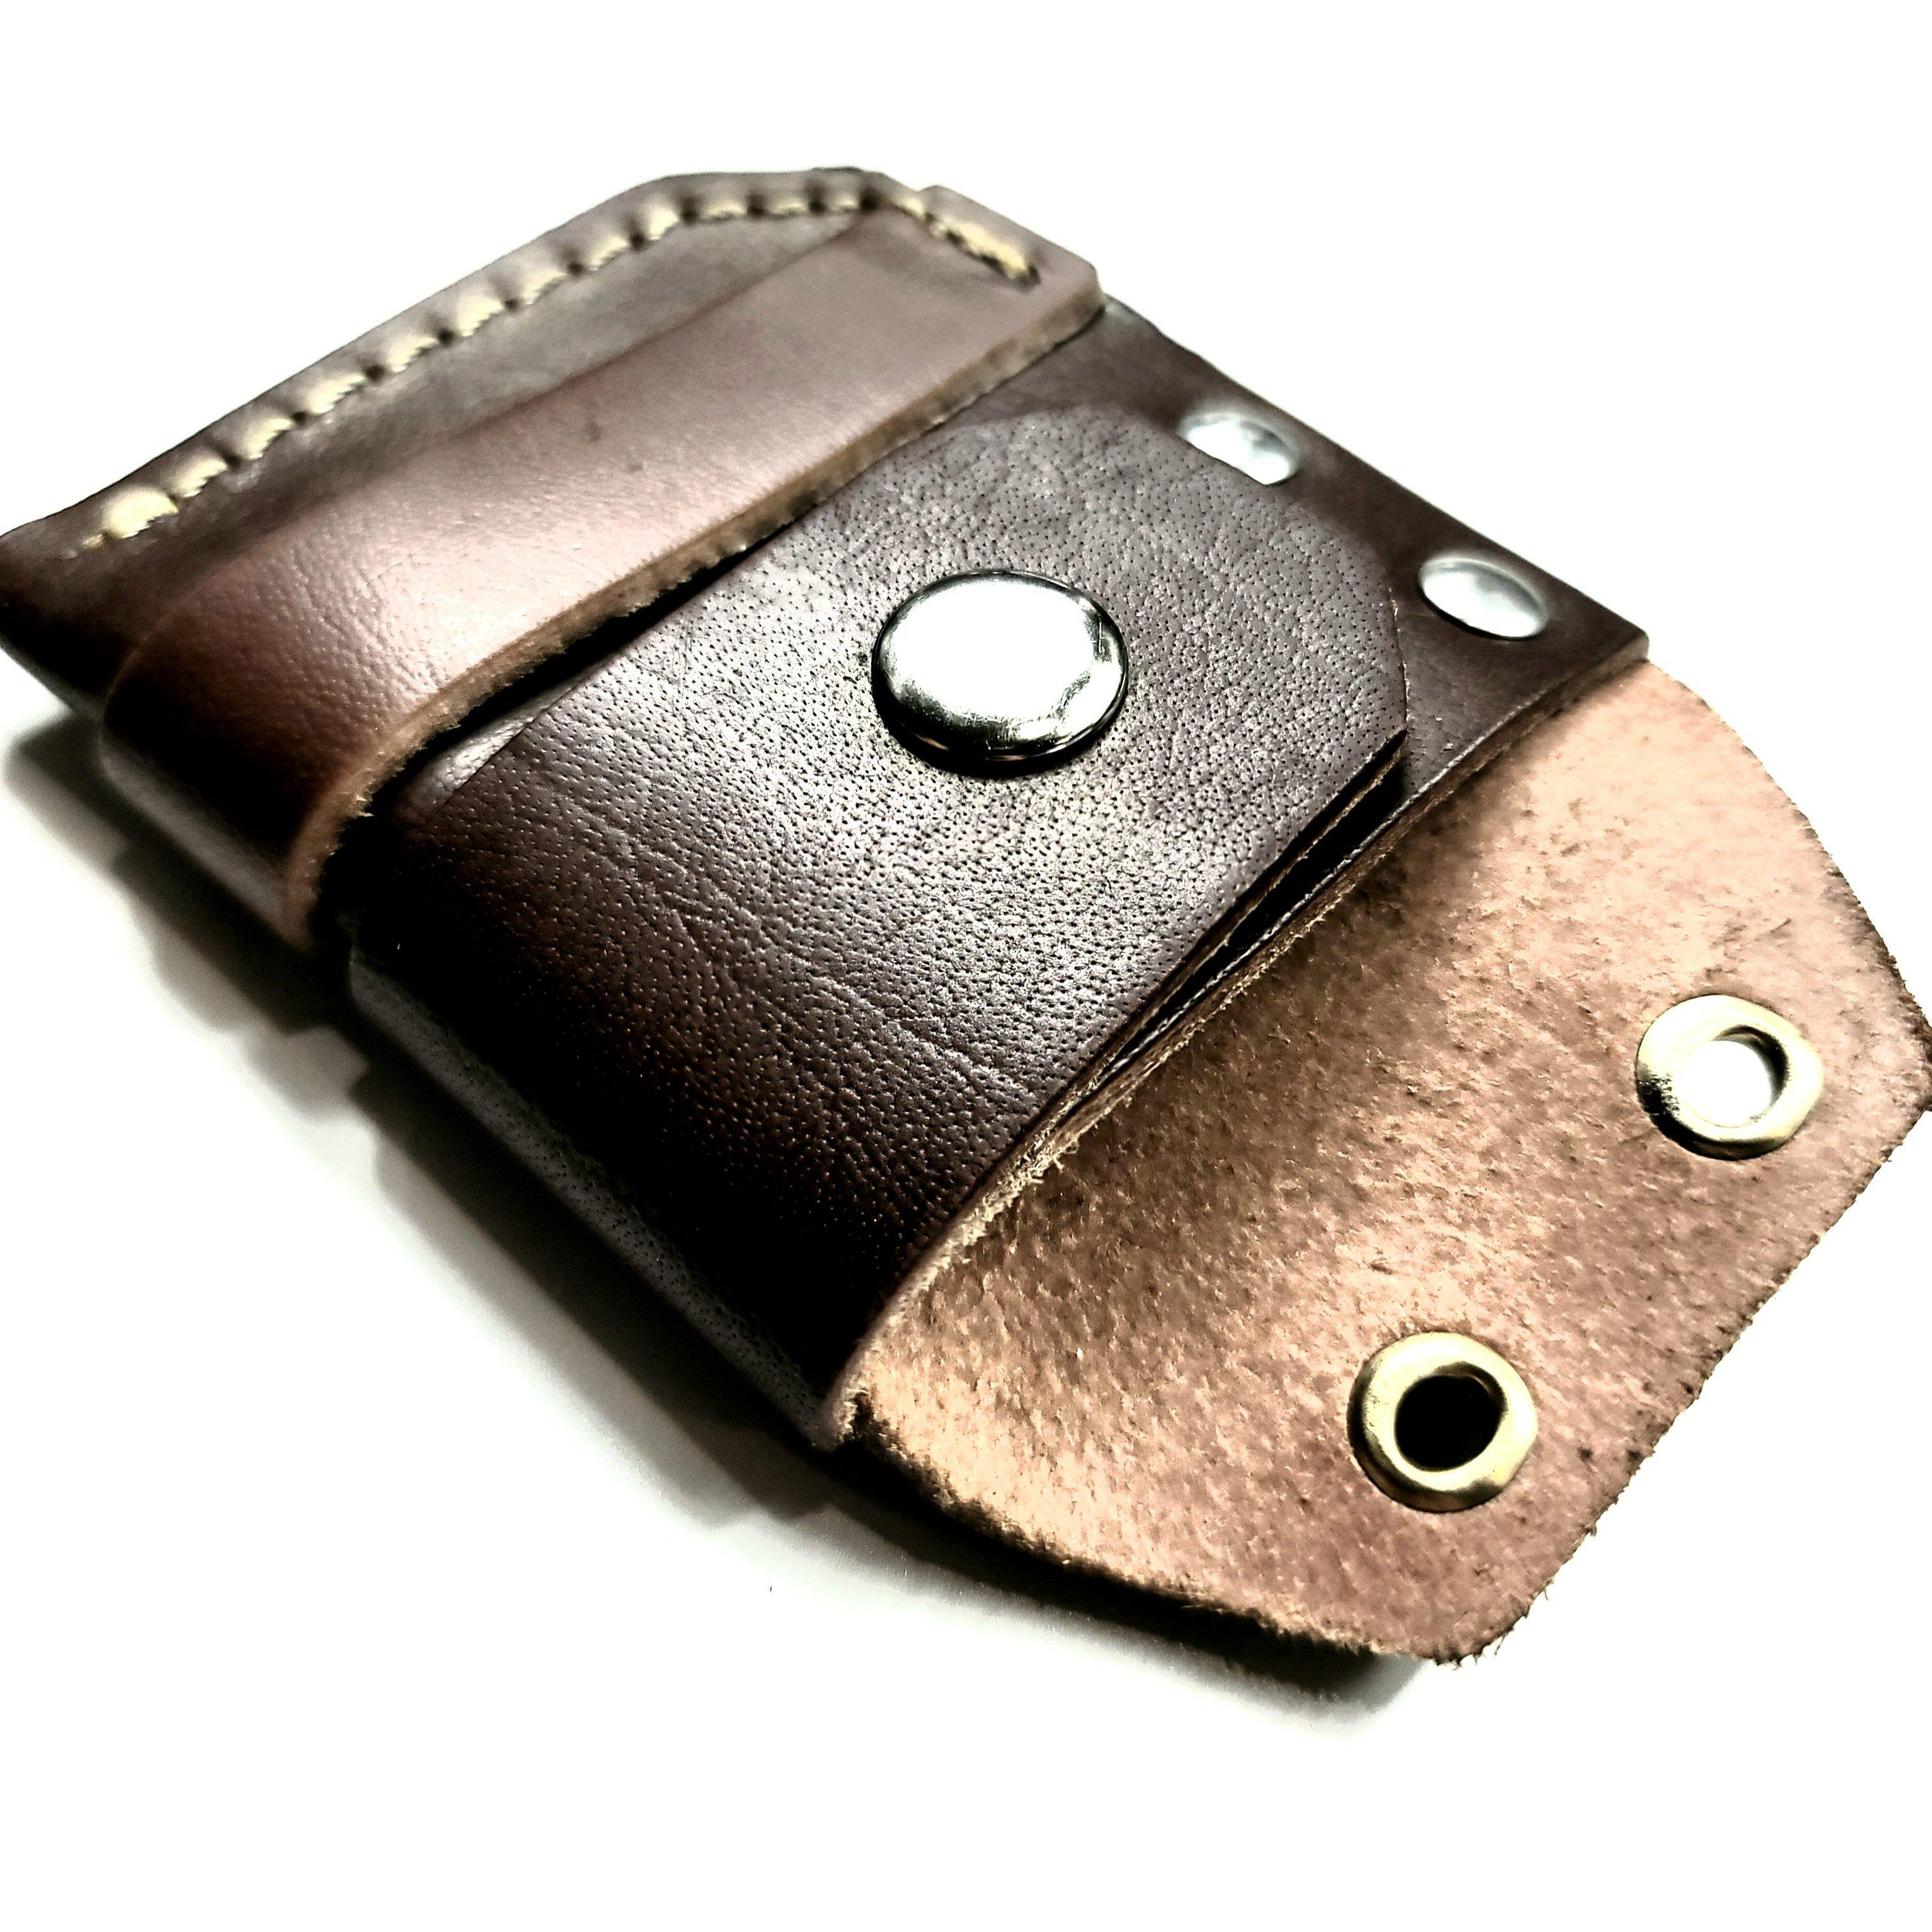 Adze with Leather Cover